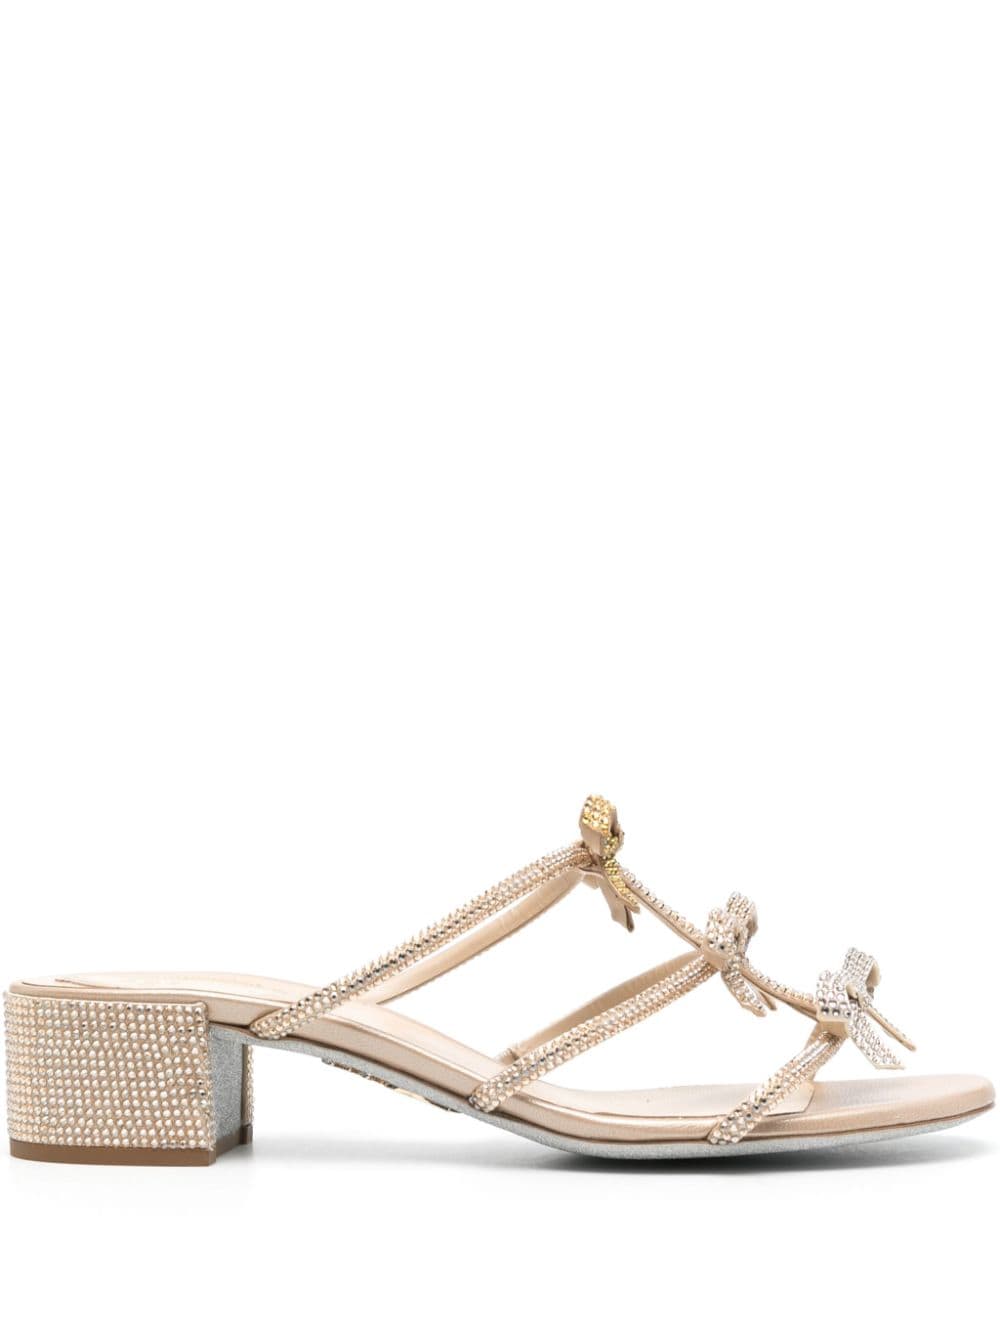 René Caovilla Caterina Bow And Crystal-embellished Satin Mules In Gold